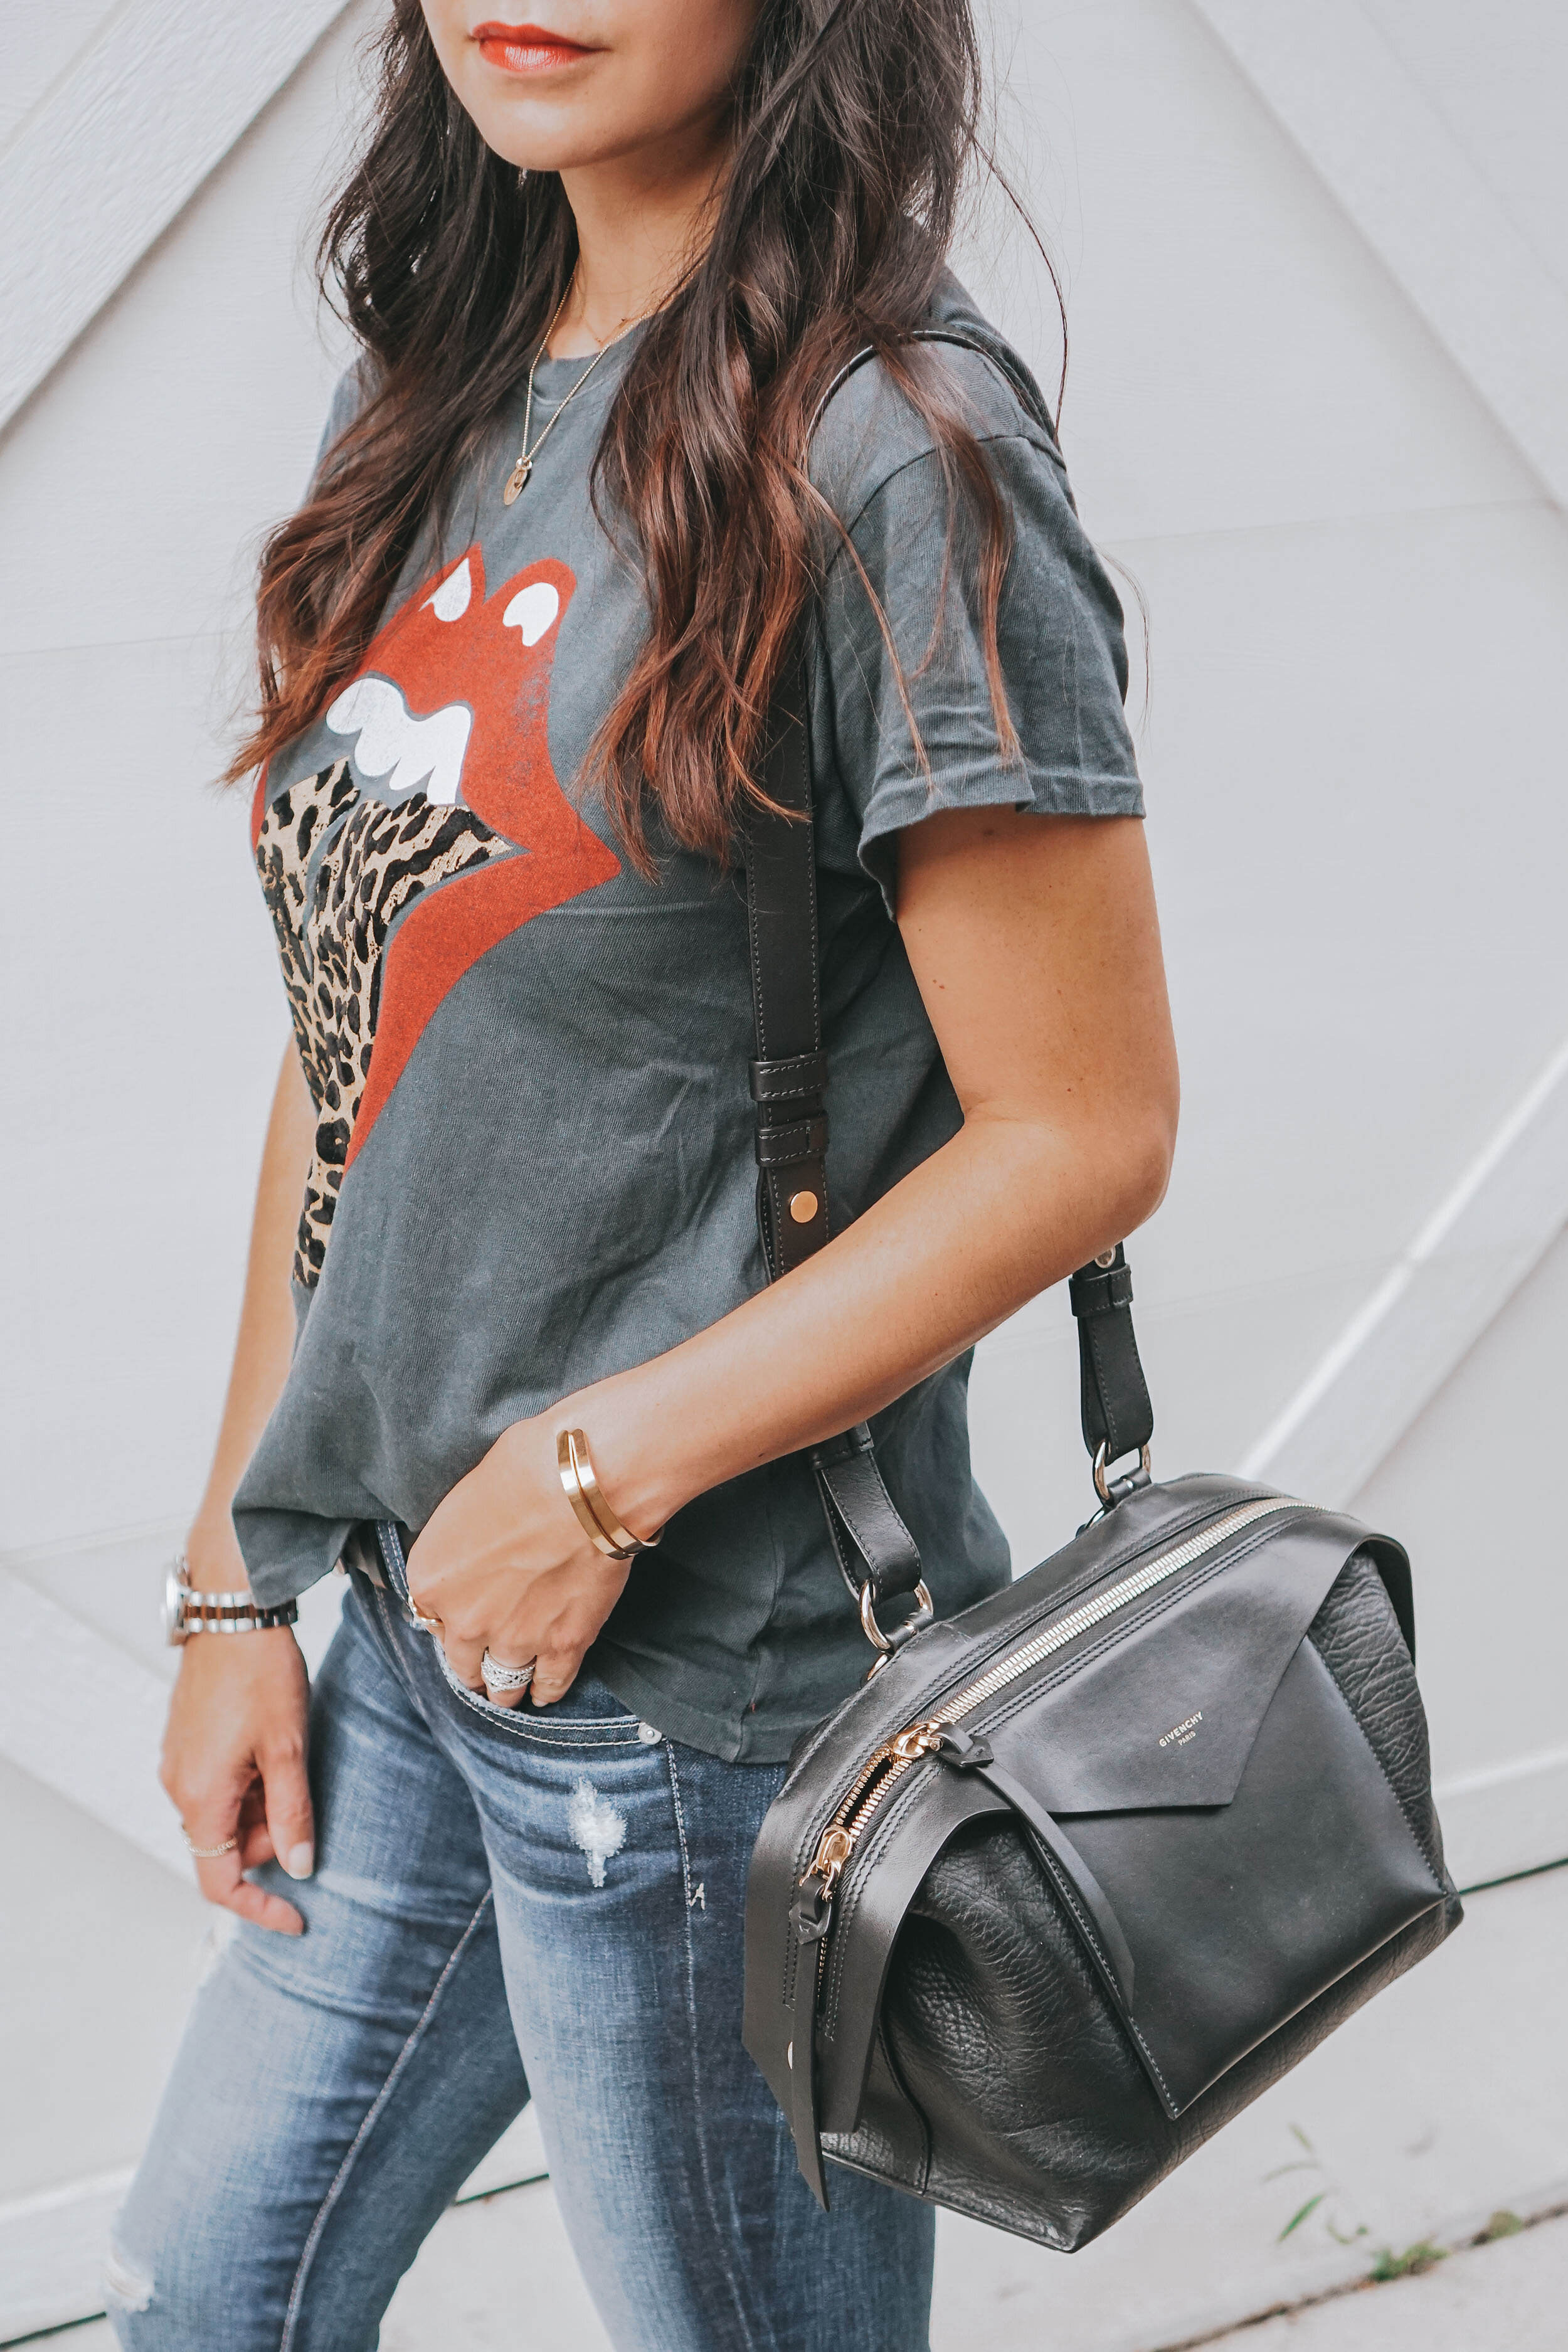 Rolling Stones Tee, How to Style A Band Tee